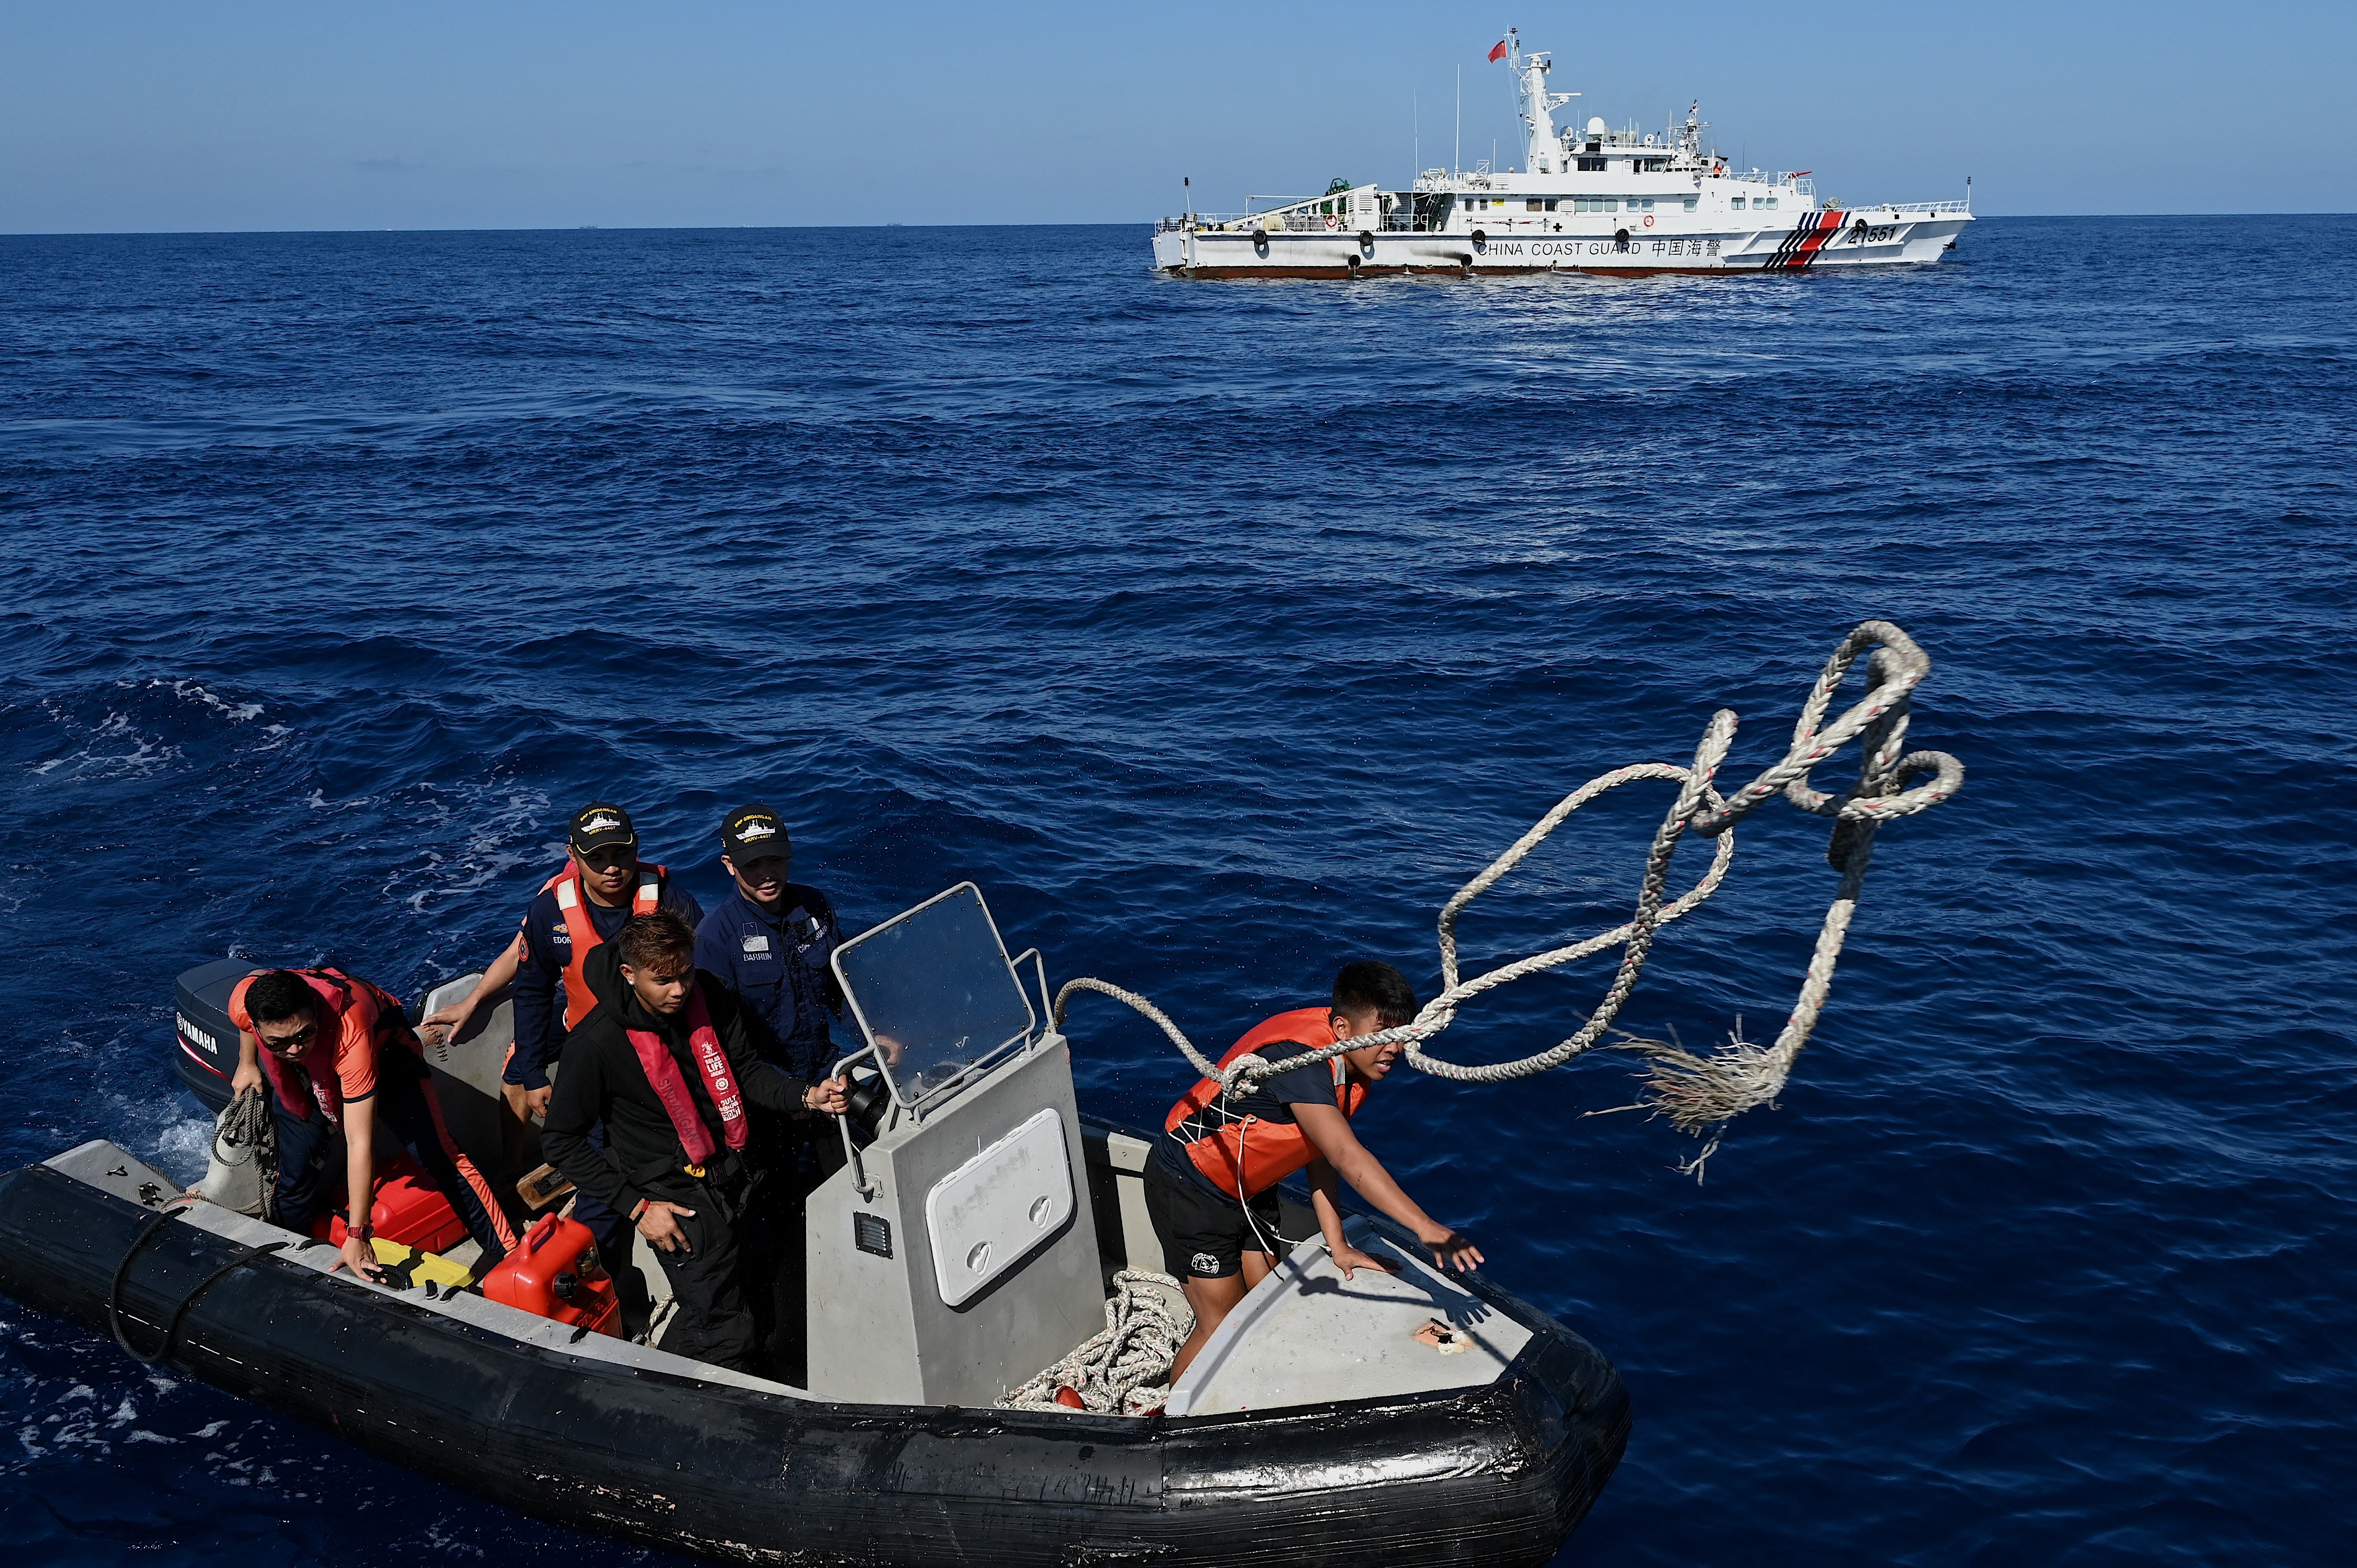 This photo taken on 5 March 2024 shows Philippine Coast Guard personnel onboard a rubber boat after they delivered medical supplies to the military chartered Unaizah 4 May as a China Coast Guard vessel (back) sails nearby during a supply mission to Second Thomas Shoal in the disputed South China Sea